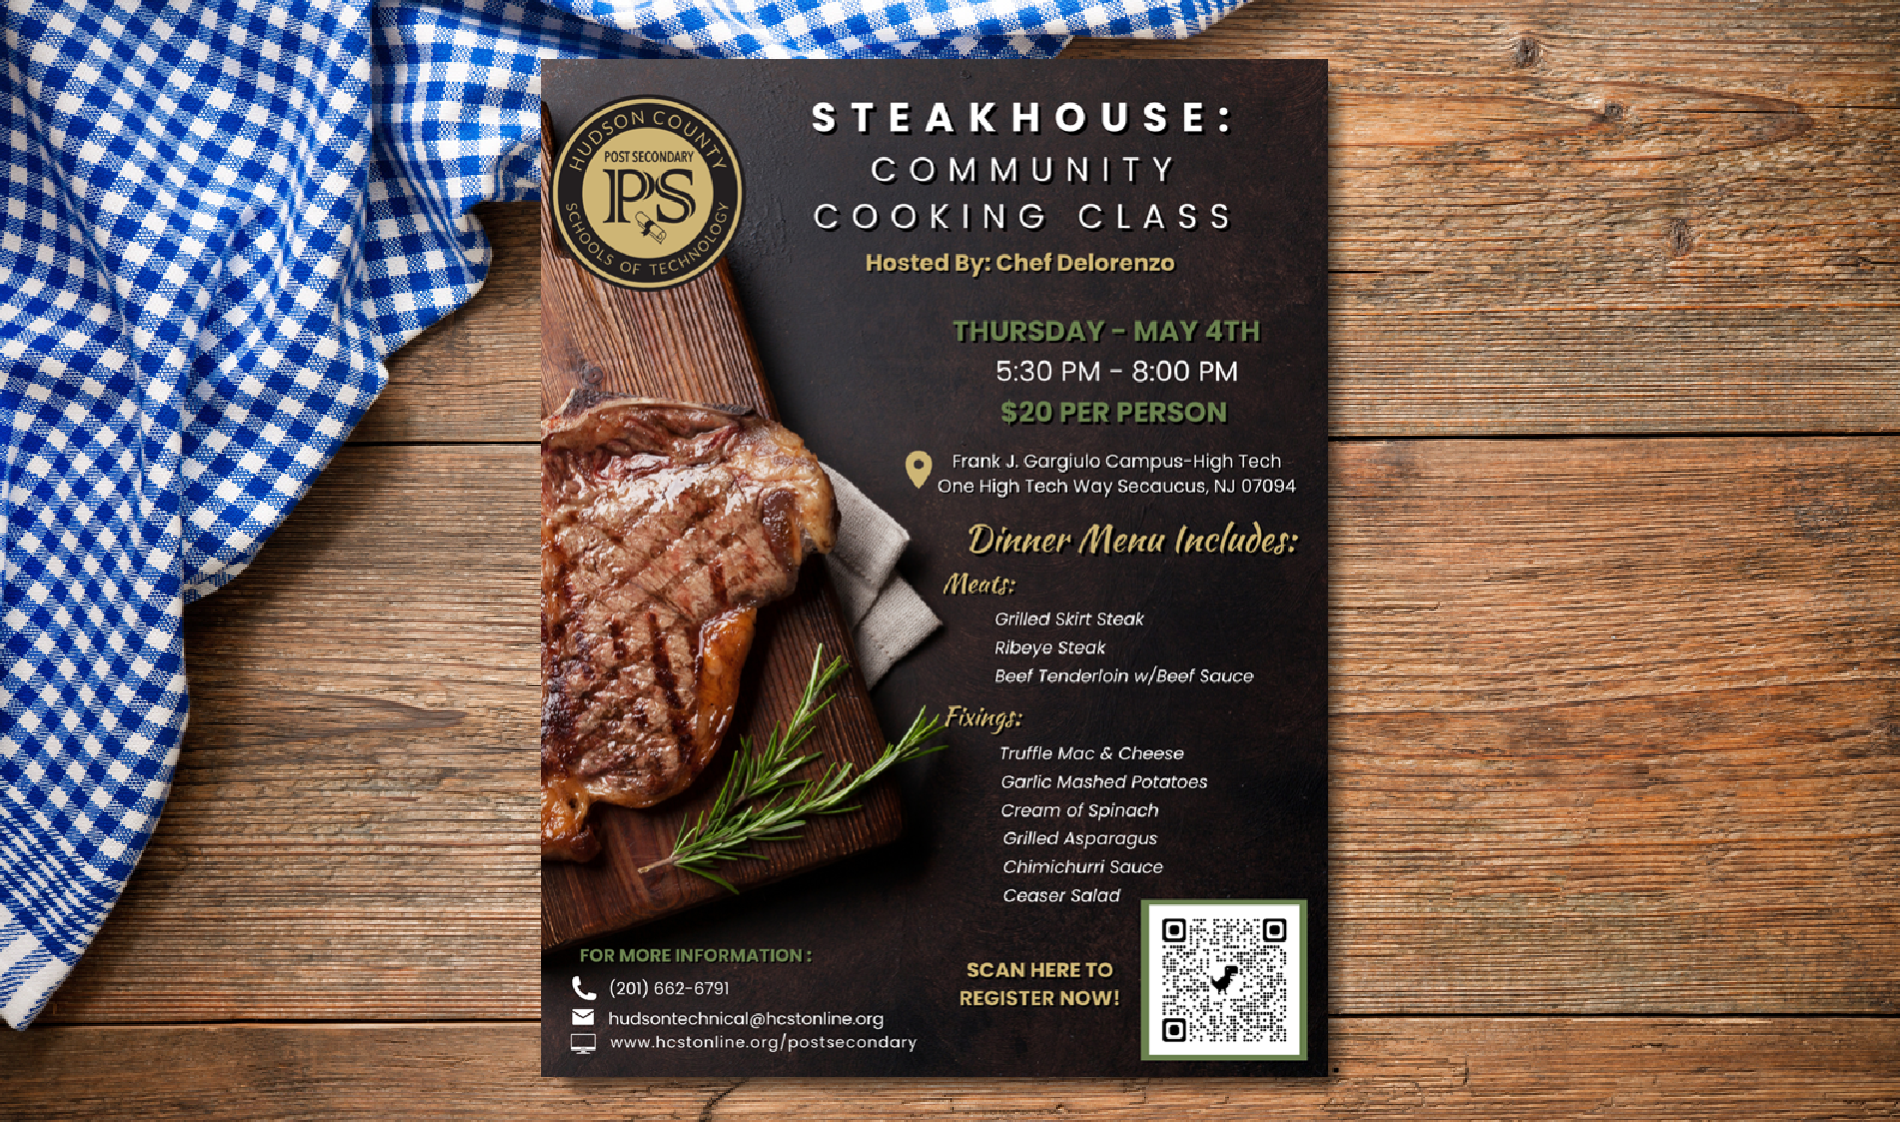 Steakhouse Cooking Class